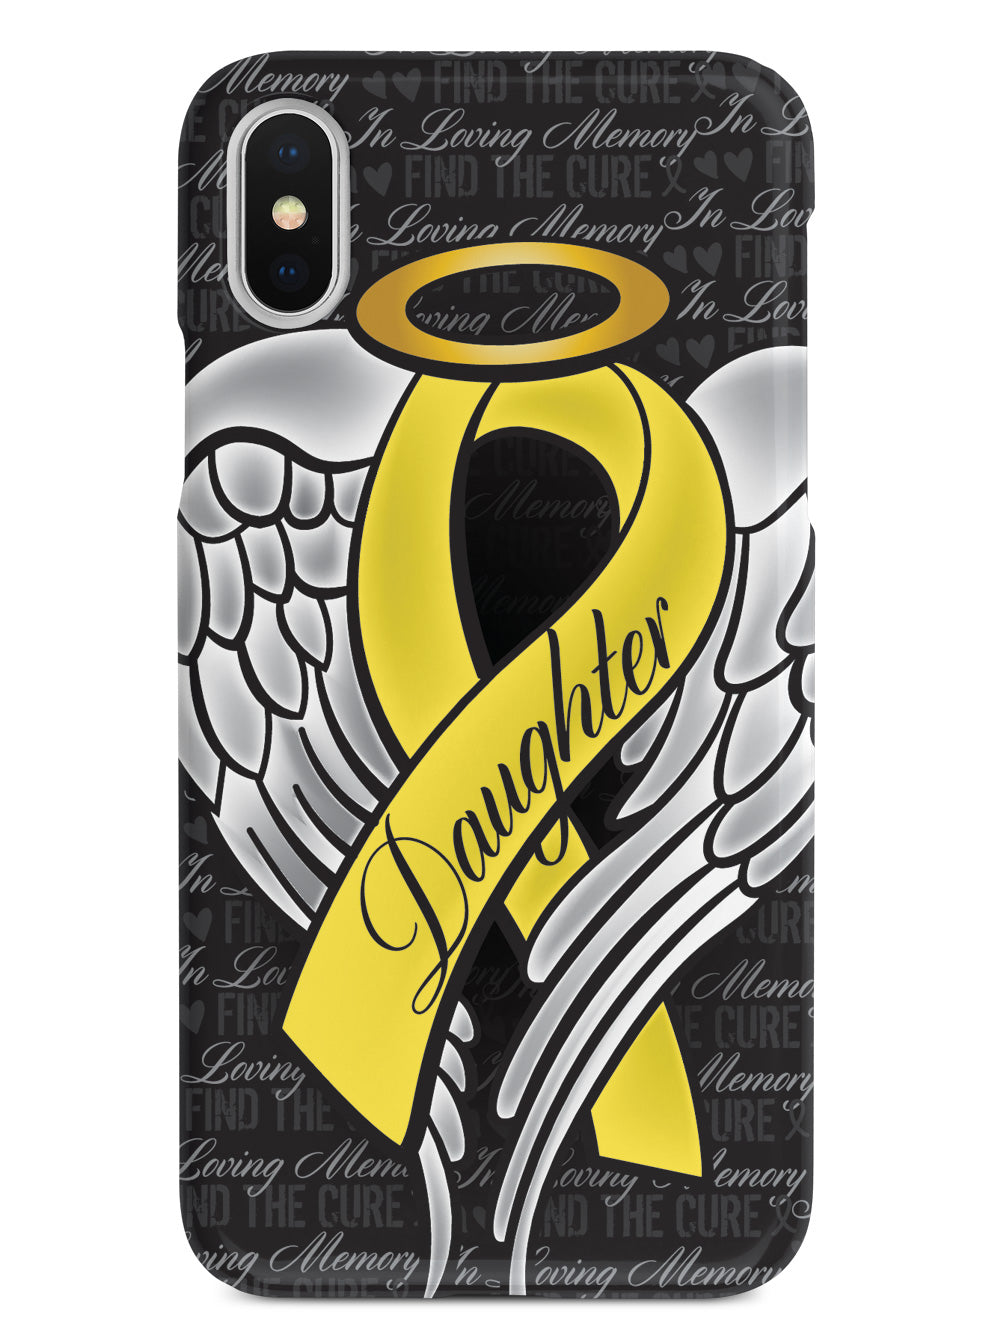 In Loving Memory of My Daughter - Yellow Ribbon Case